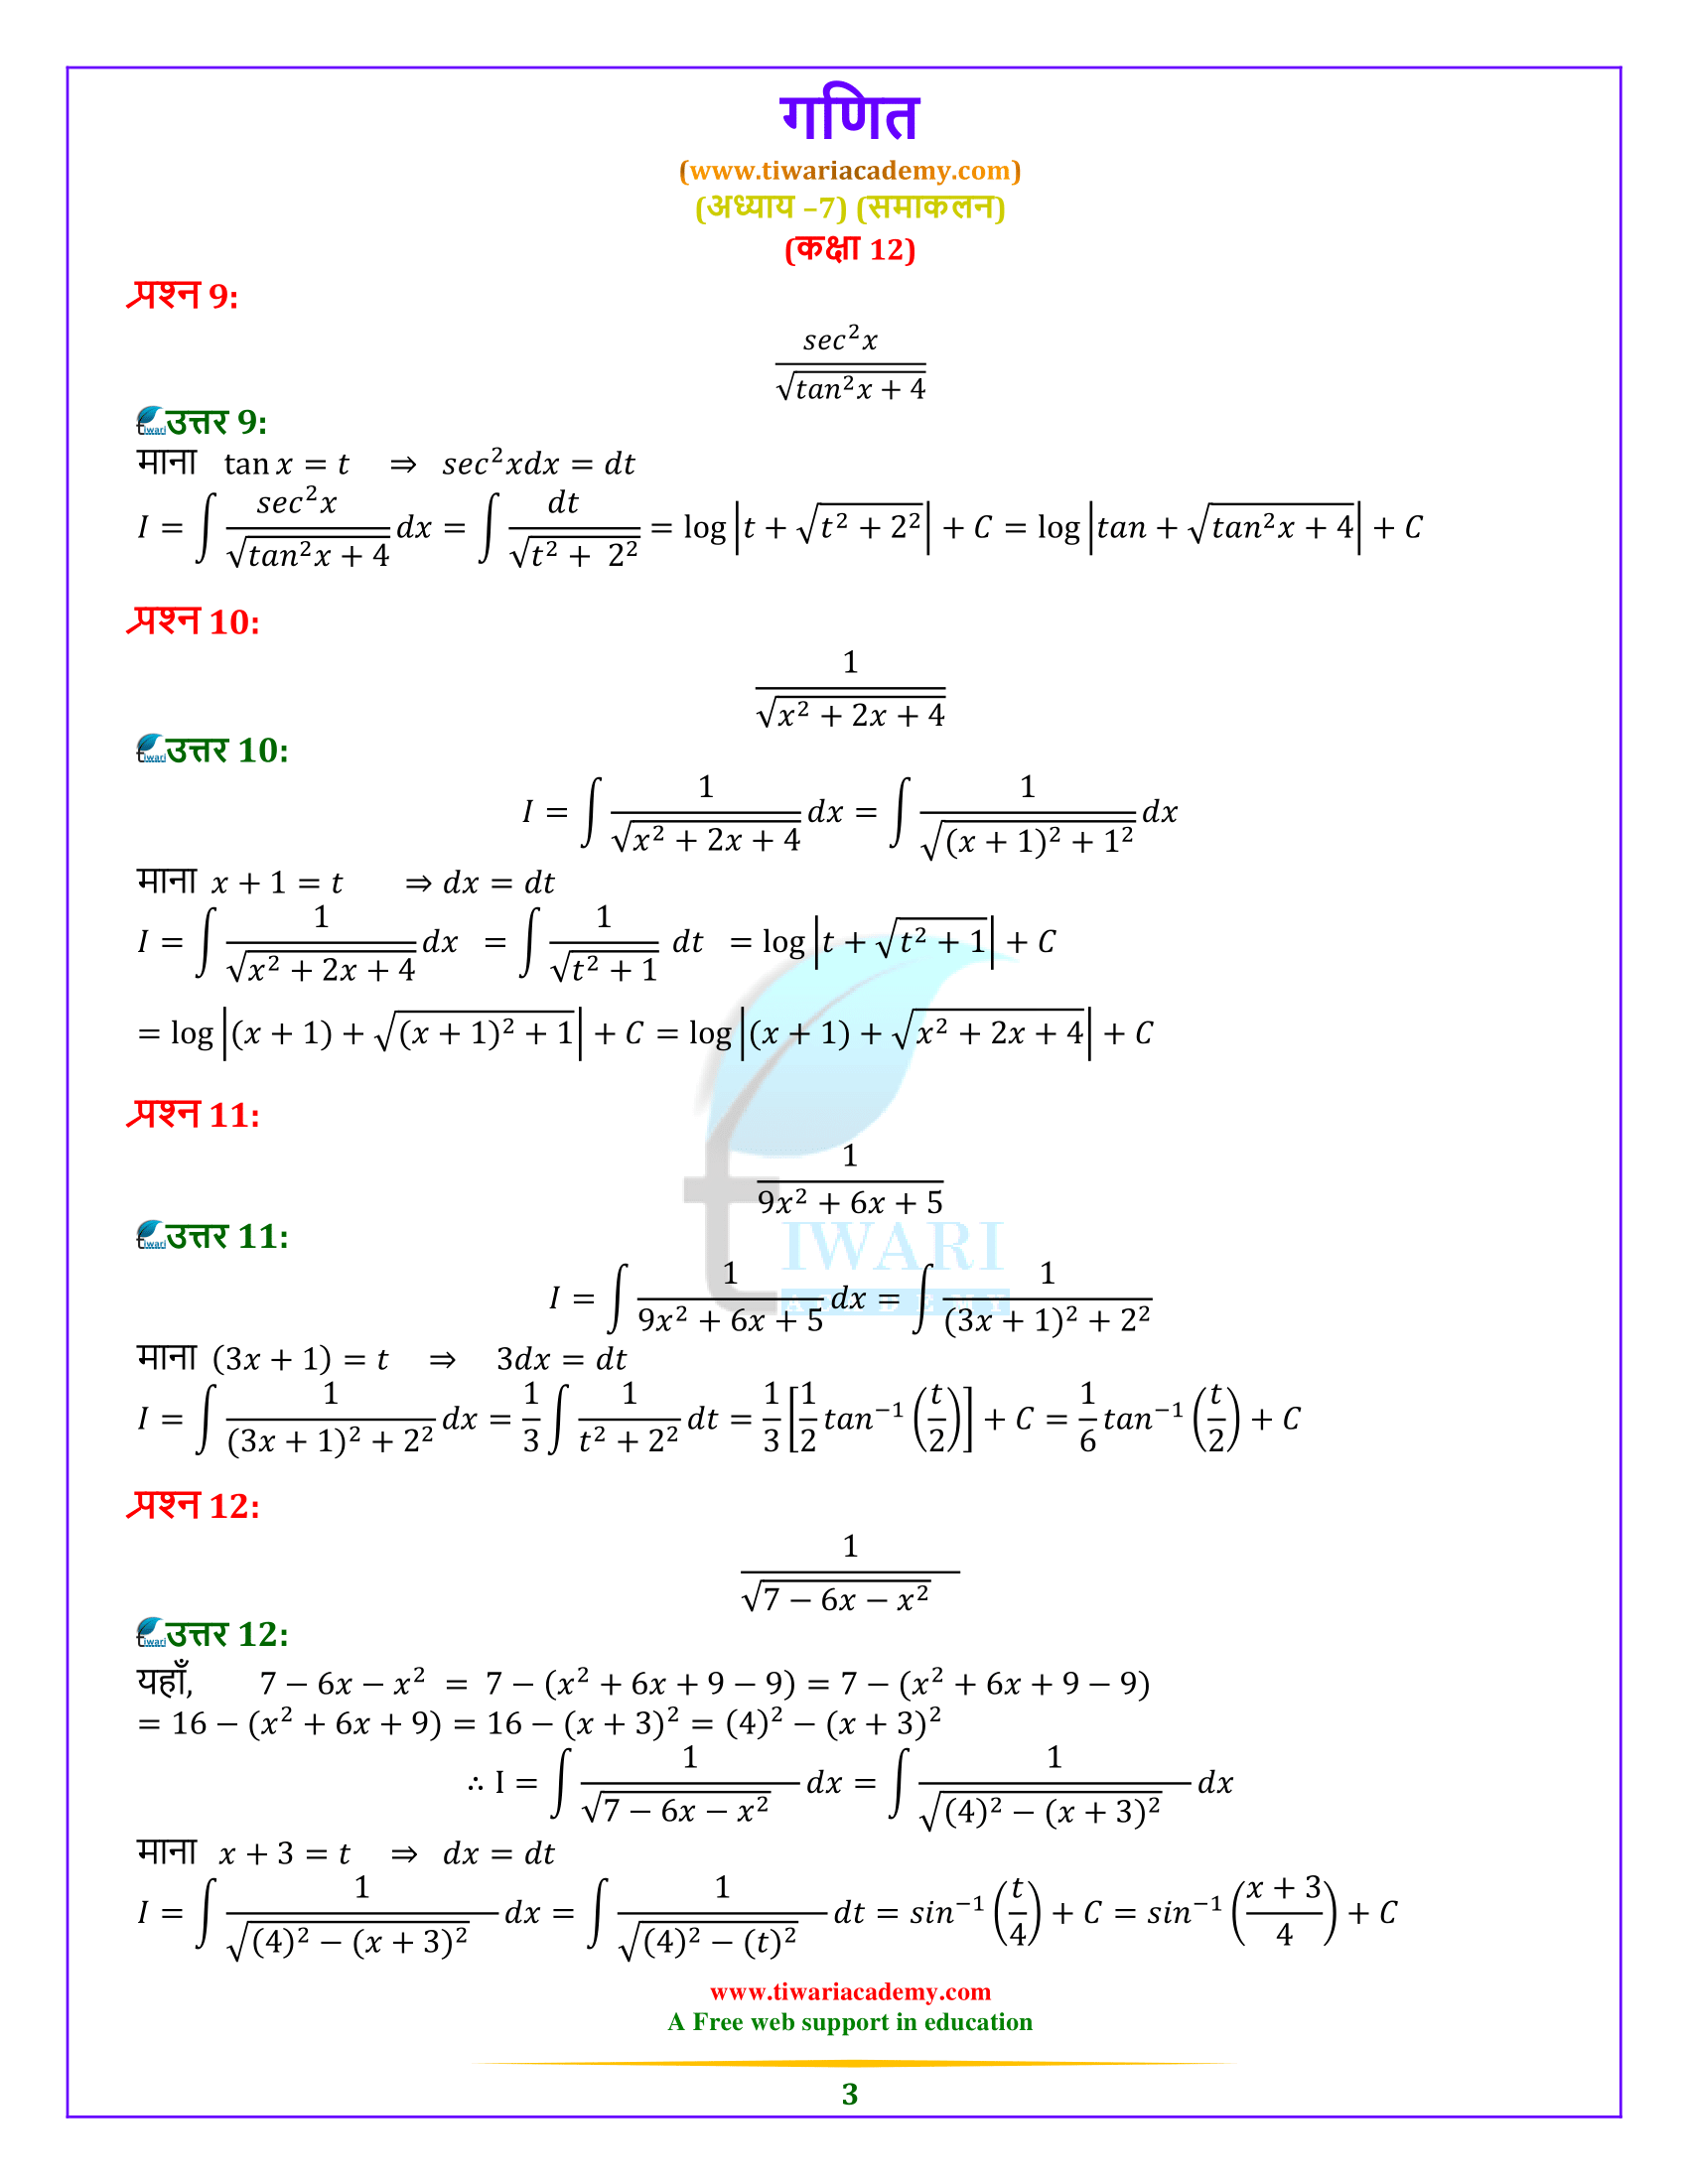 12 Maths Exercise 7.4 in PDF